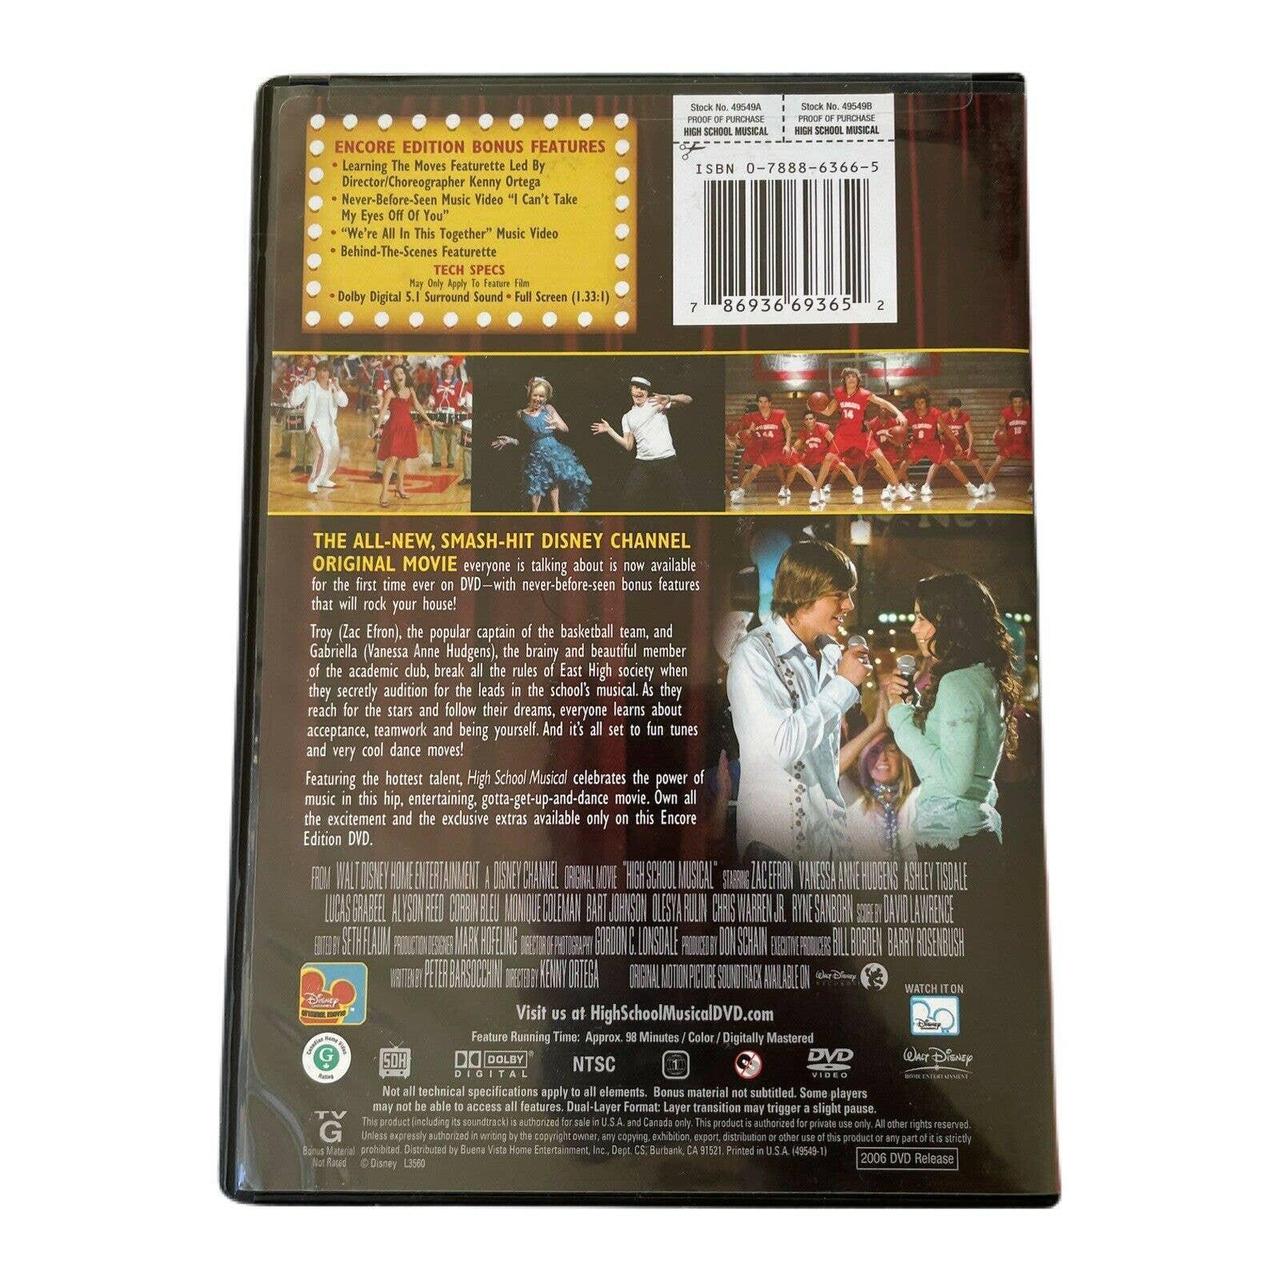 Product Image 3 - High School Musical (DVD, 2006).

Brand